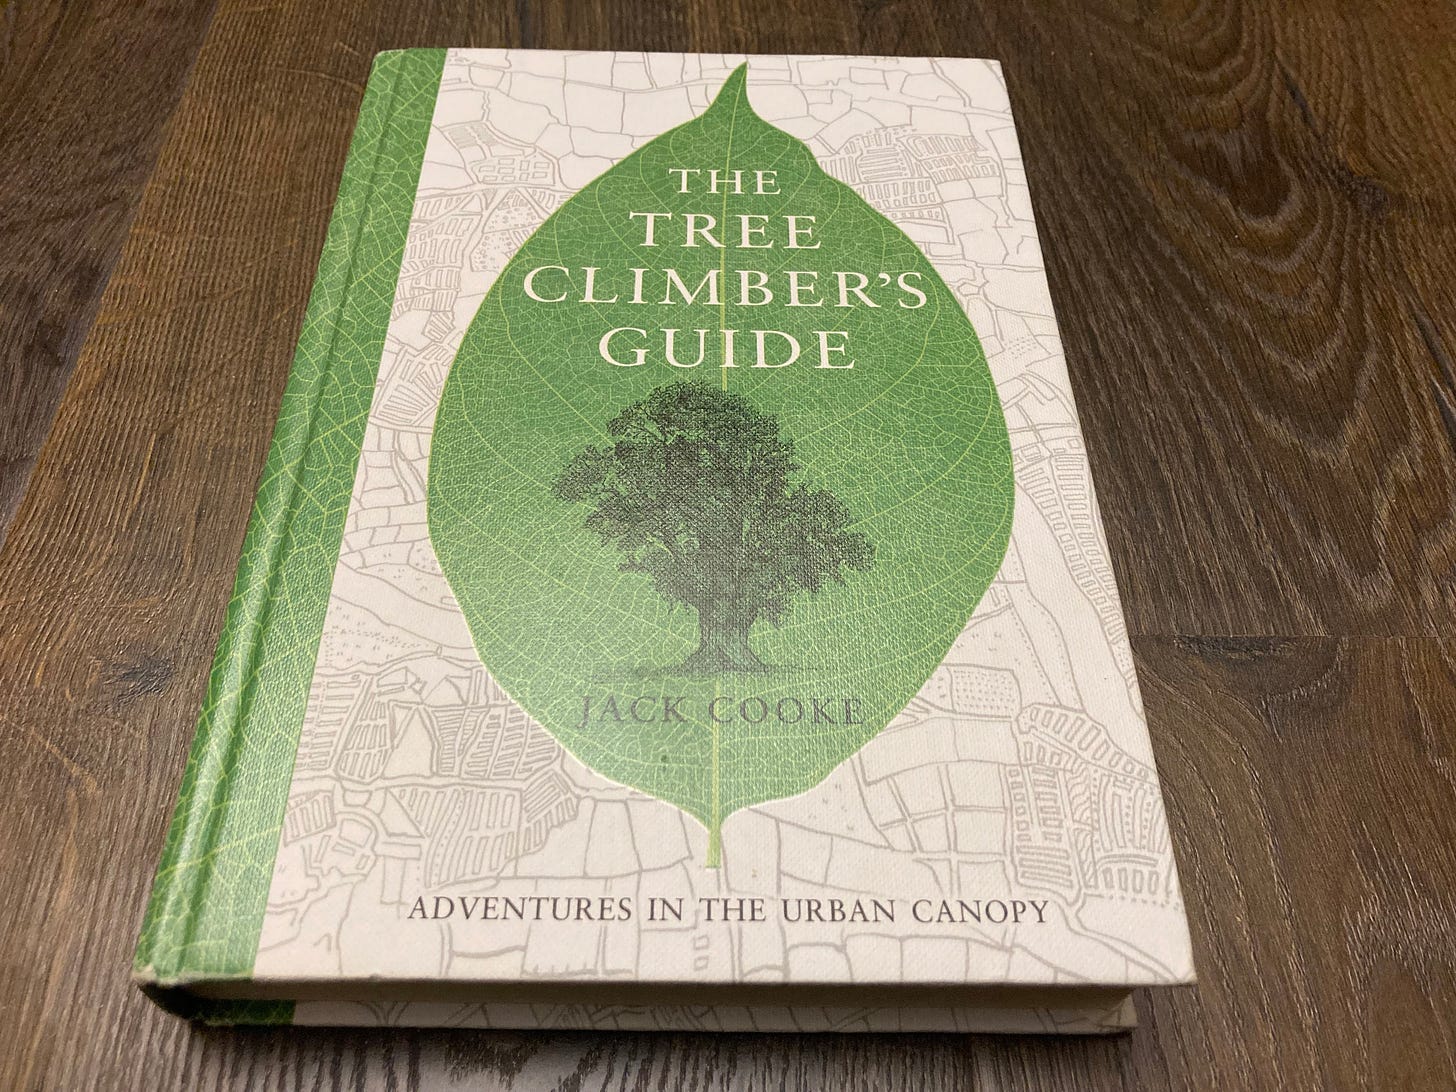 A photograph of the book The Tree Climber's Guide, by Jack Cooke